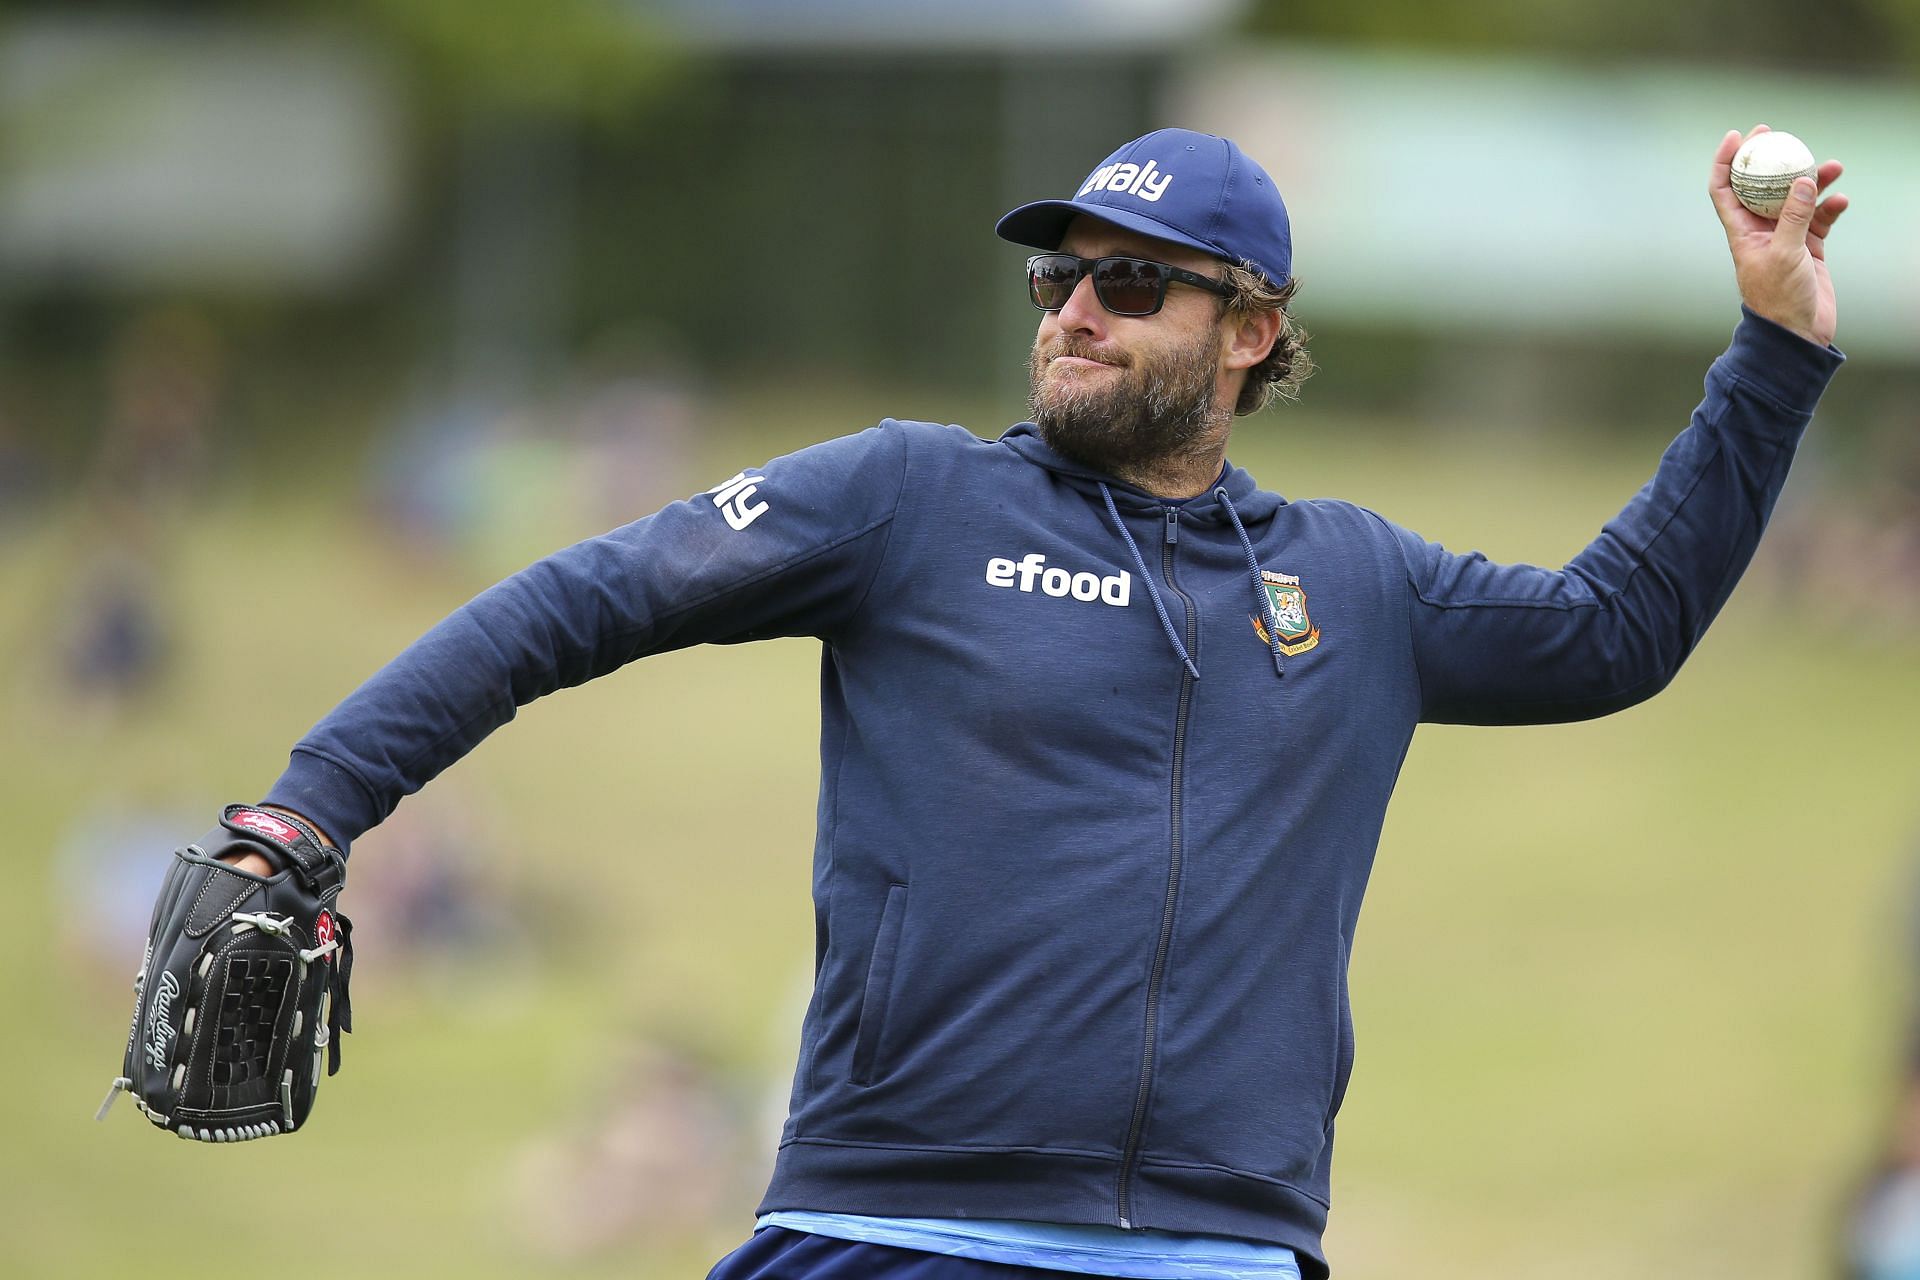 Vettori could be the perfect coach to build an IPL side from scratch